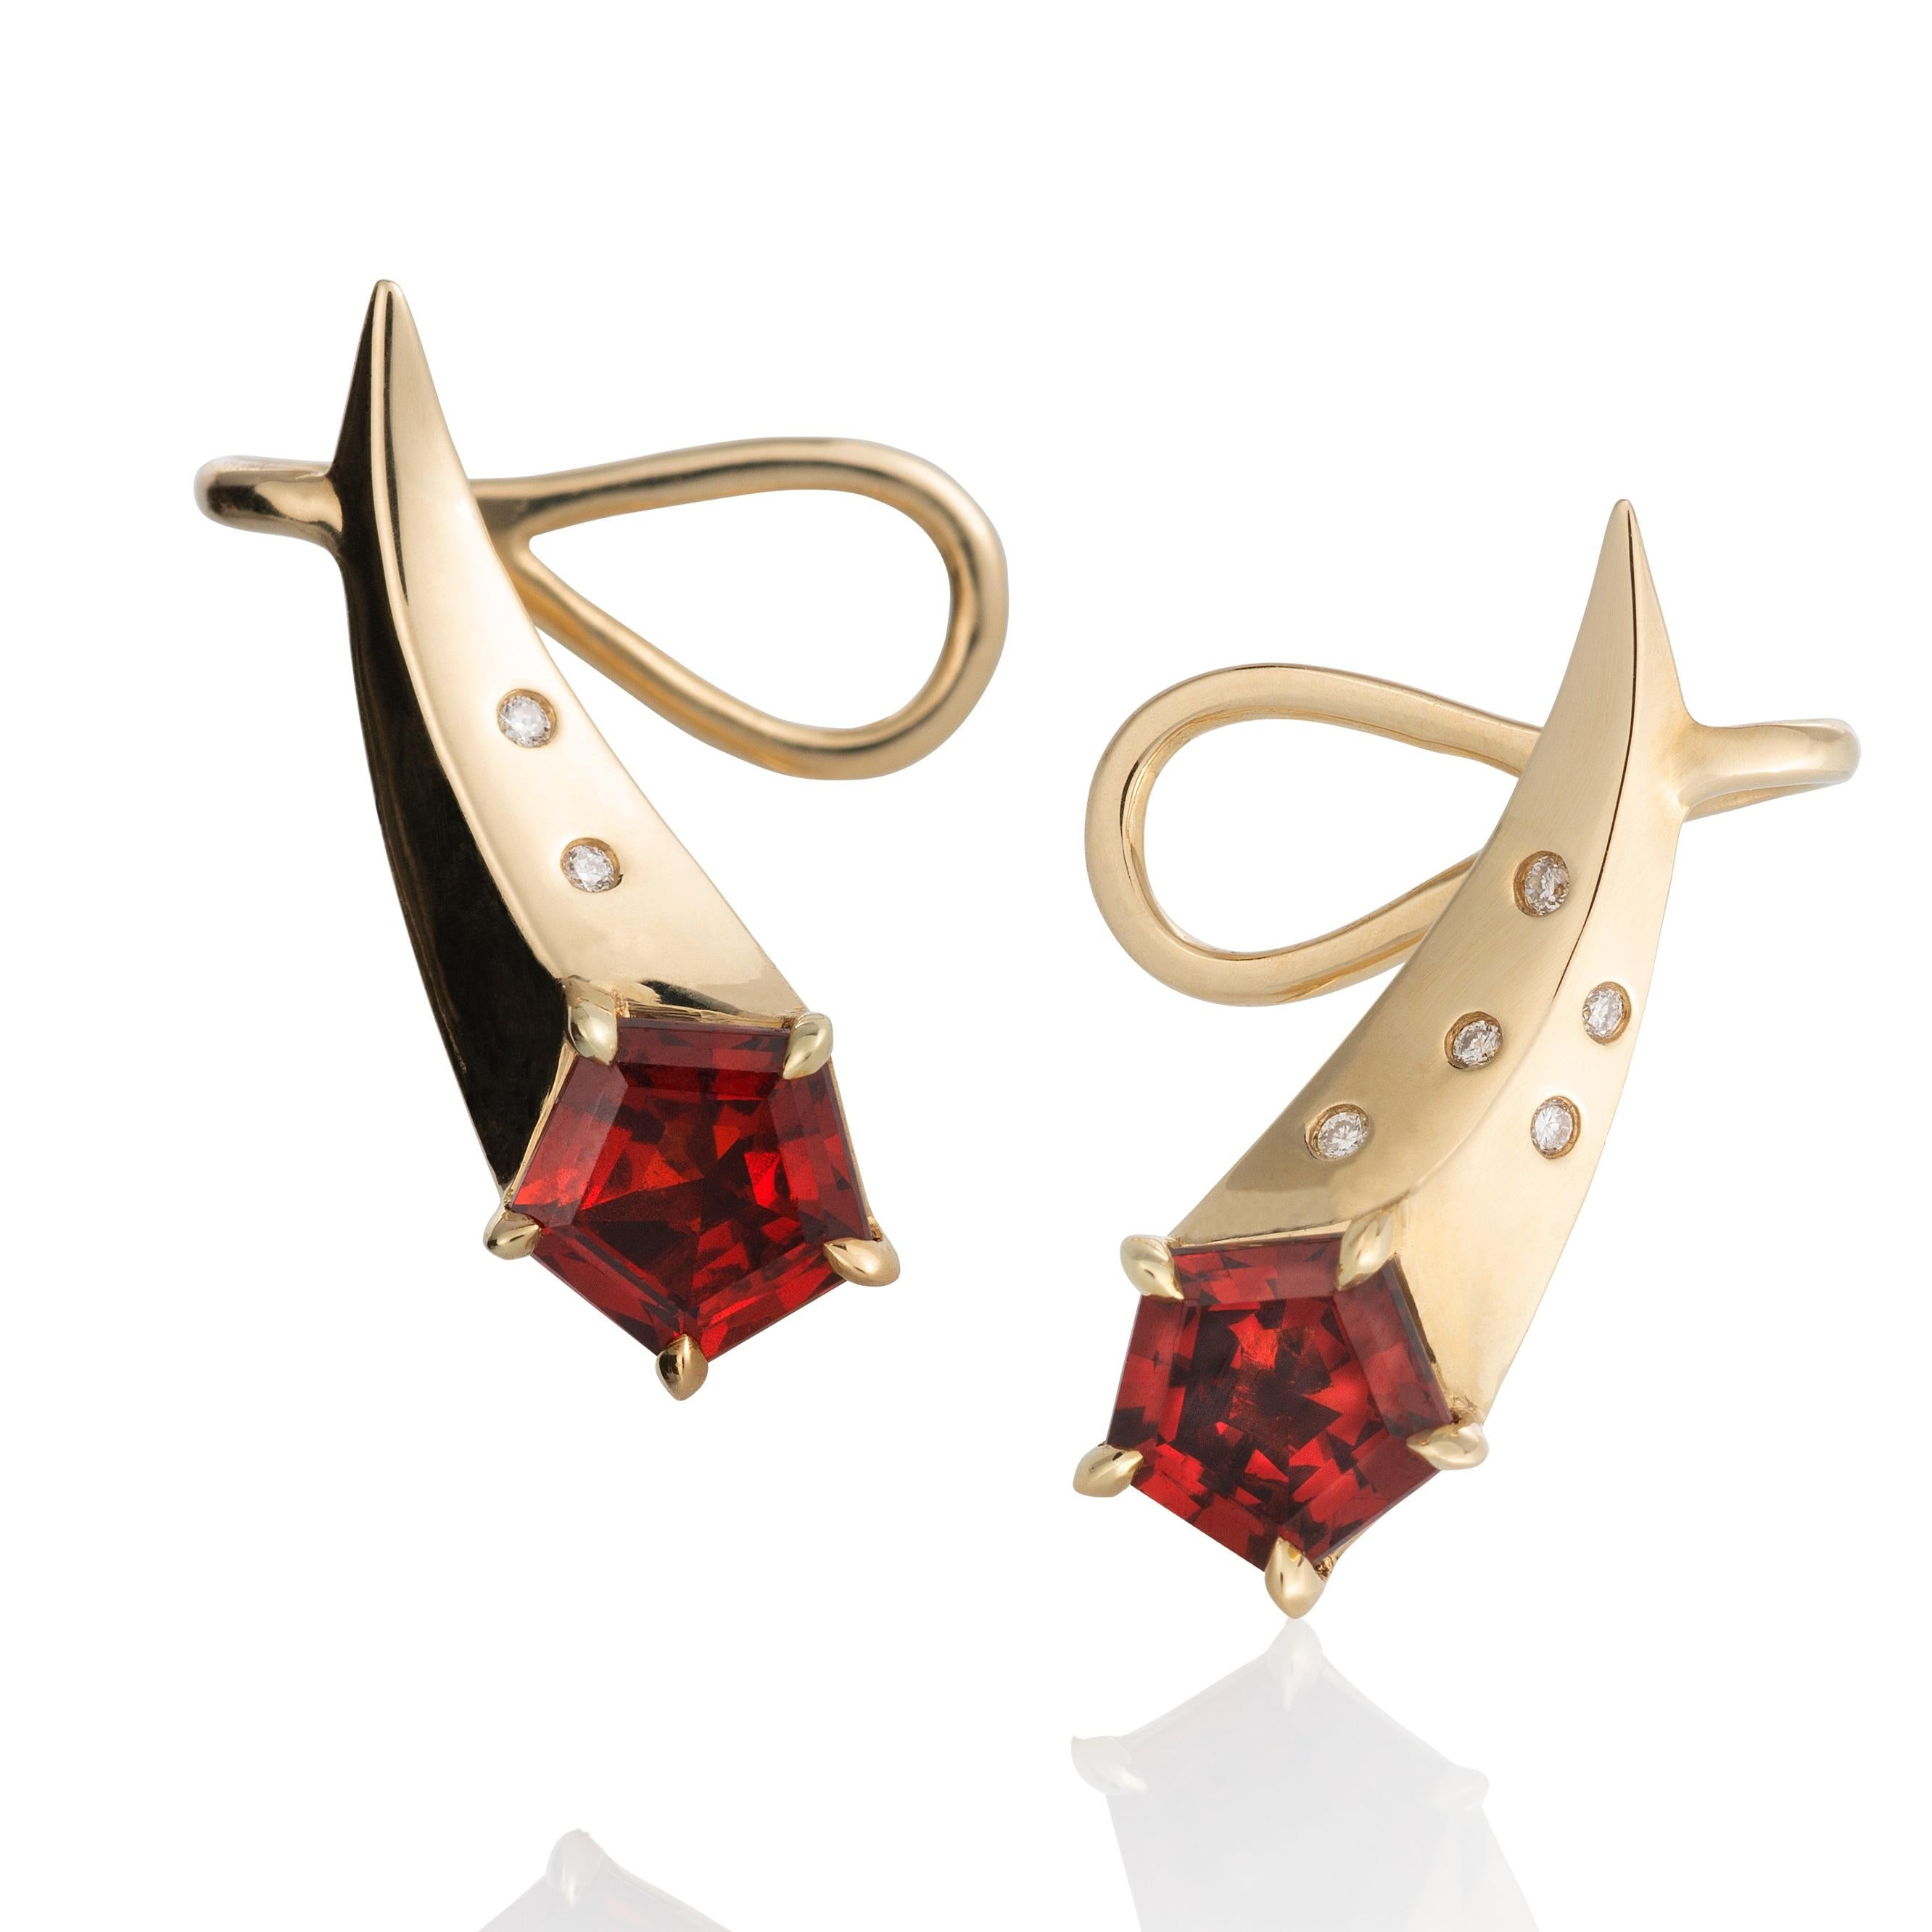 Made in 14ky with diamonds, these are perfect little ear climber earrings, designed for daily wear.  They are small, shooting stars with fancy cut, 5mm Madeira Garnet and ten tiny diamonds lighting up the tail of the comet.

The earrings are made